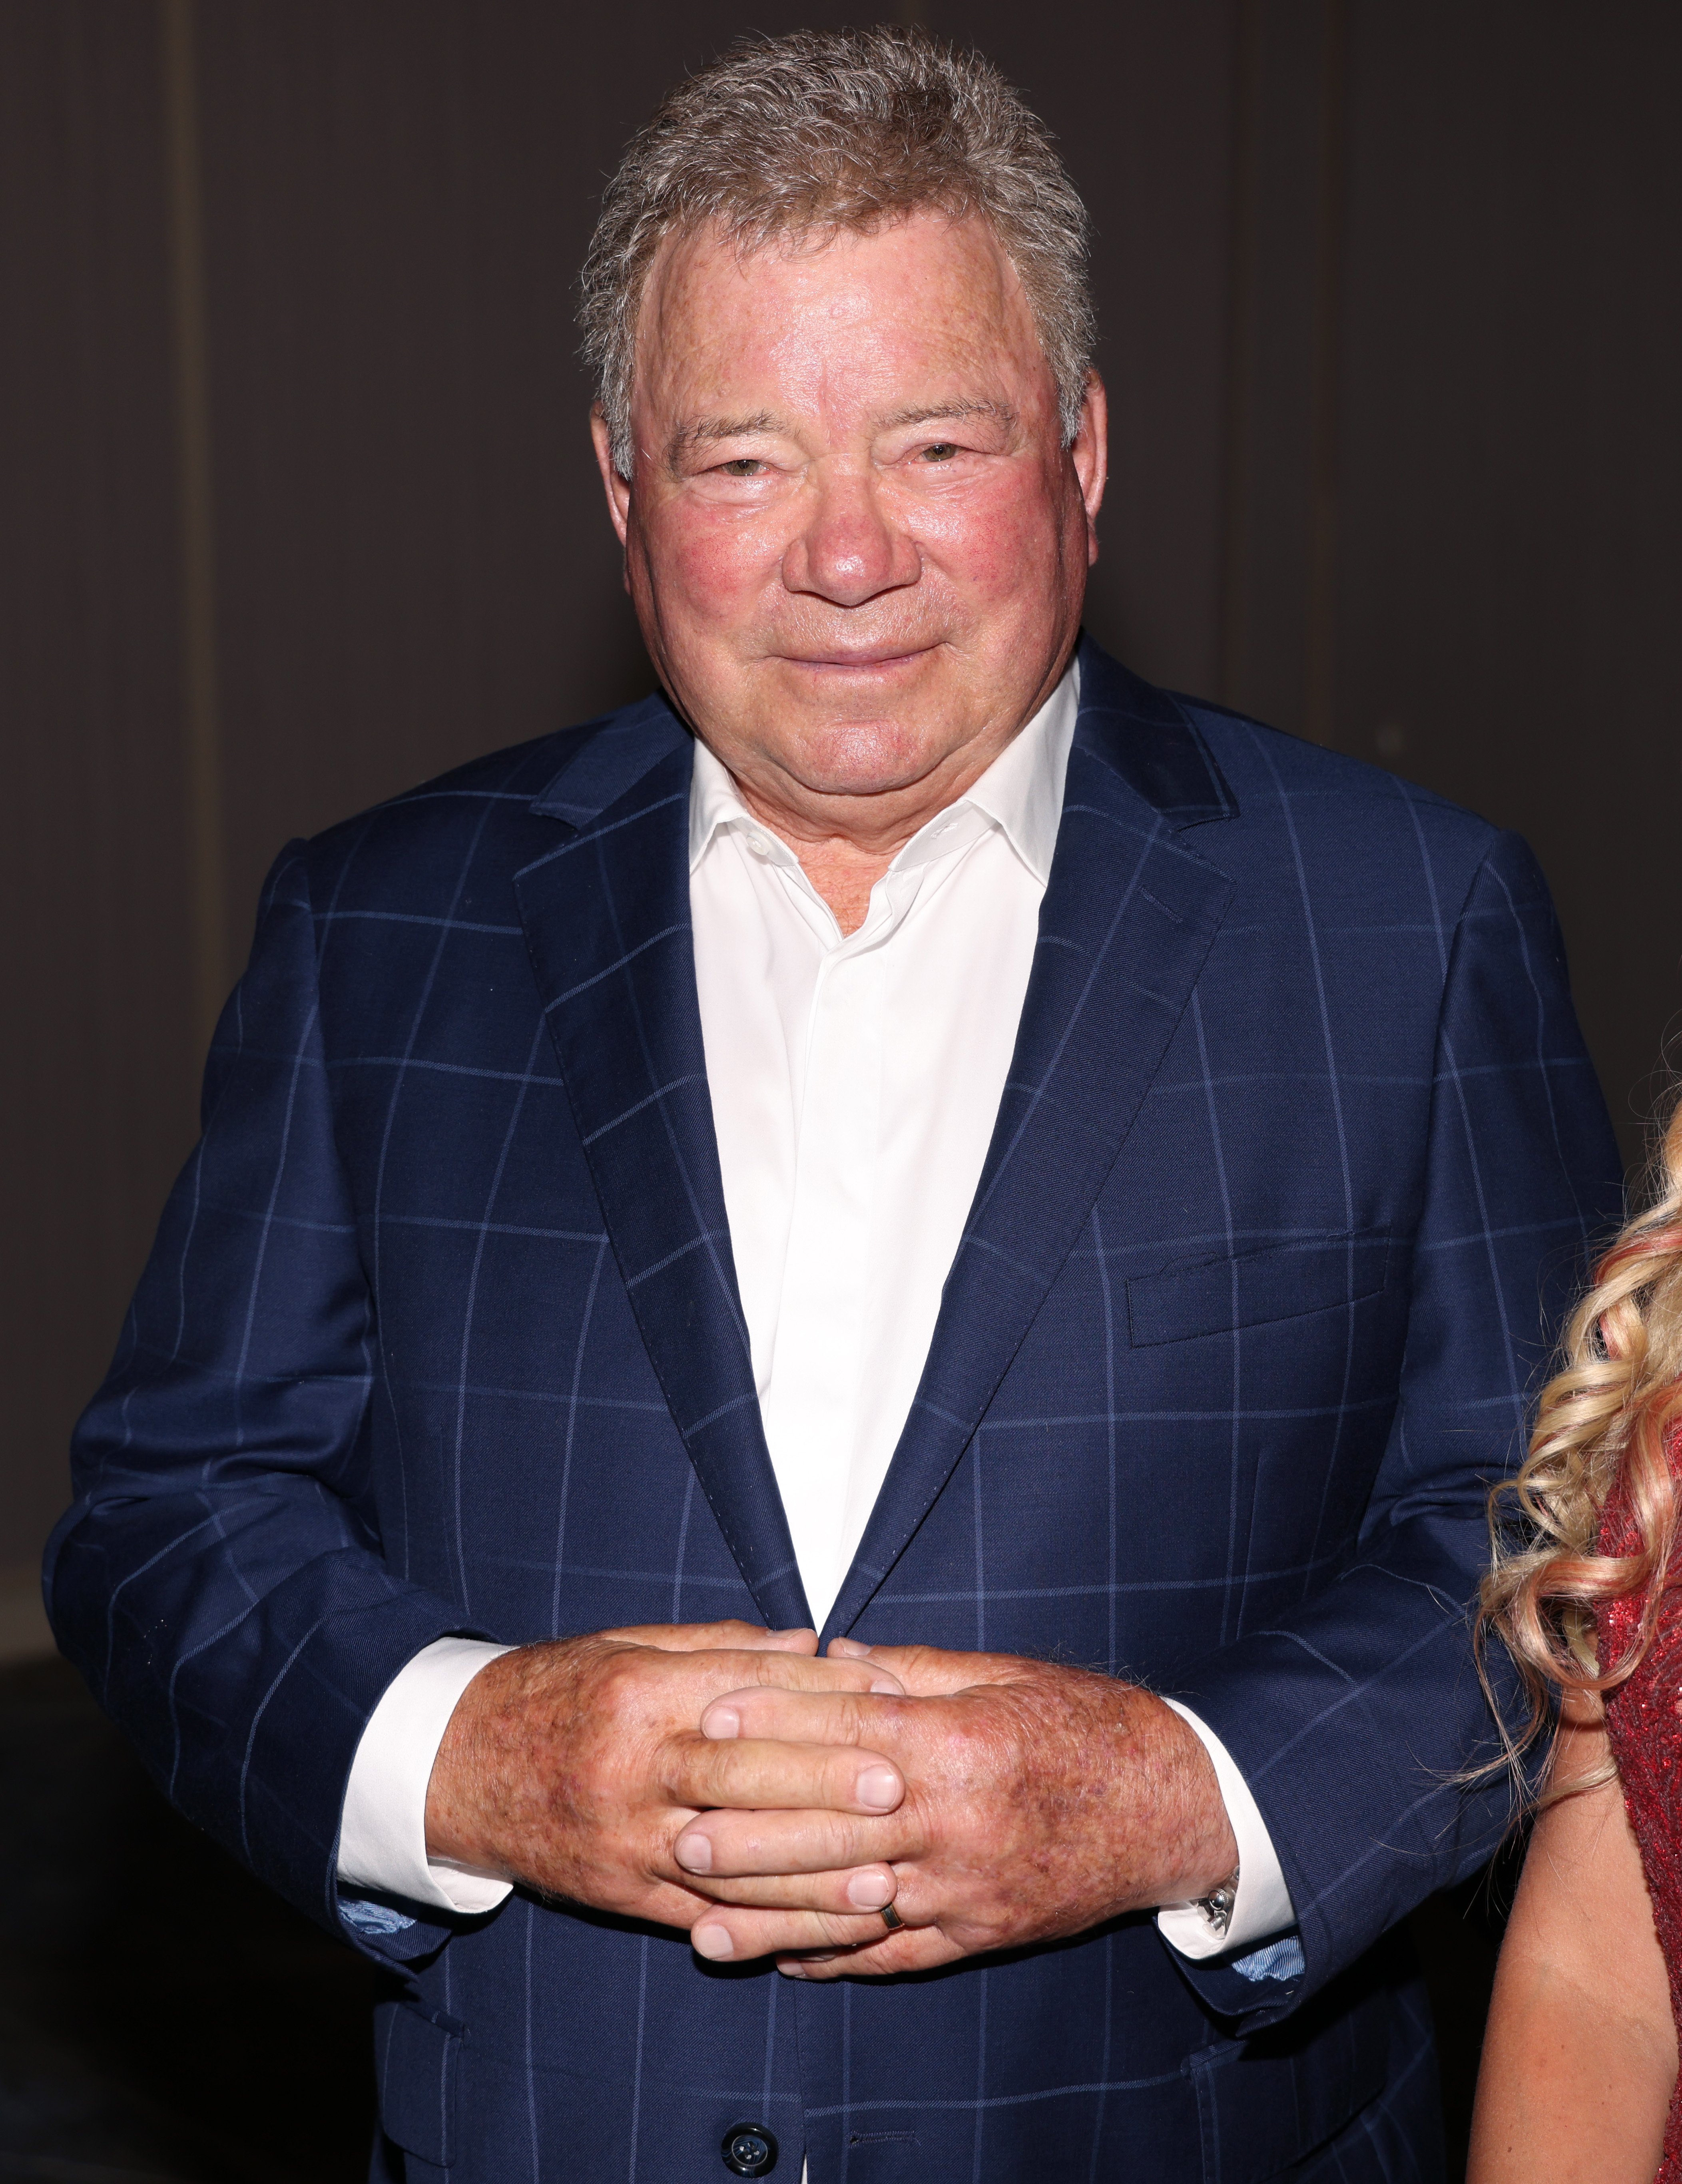 William Shatner at the 26th Annual Jack Webb Awards Gala on August 20, 2022, in Los Angeles, California | Source: Getty Images